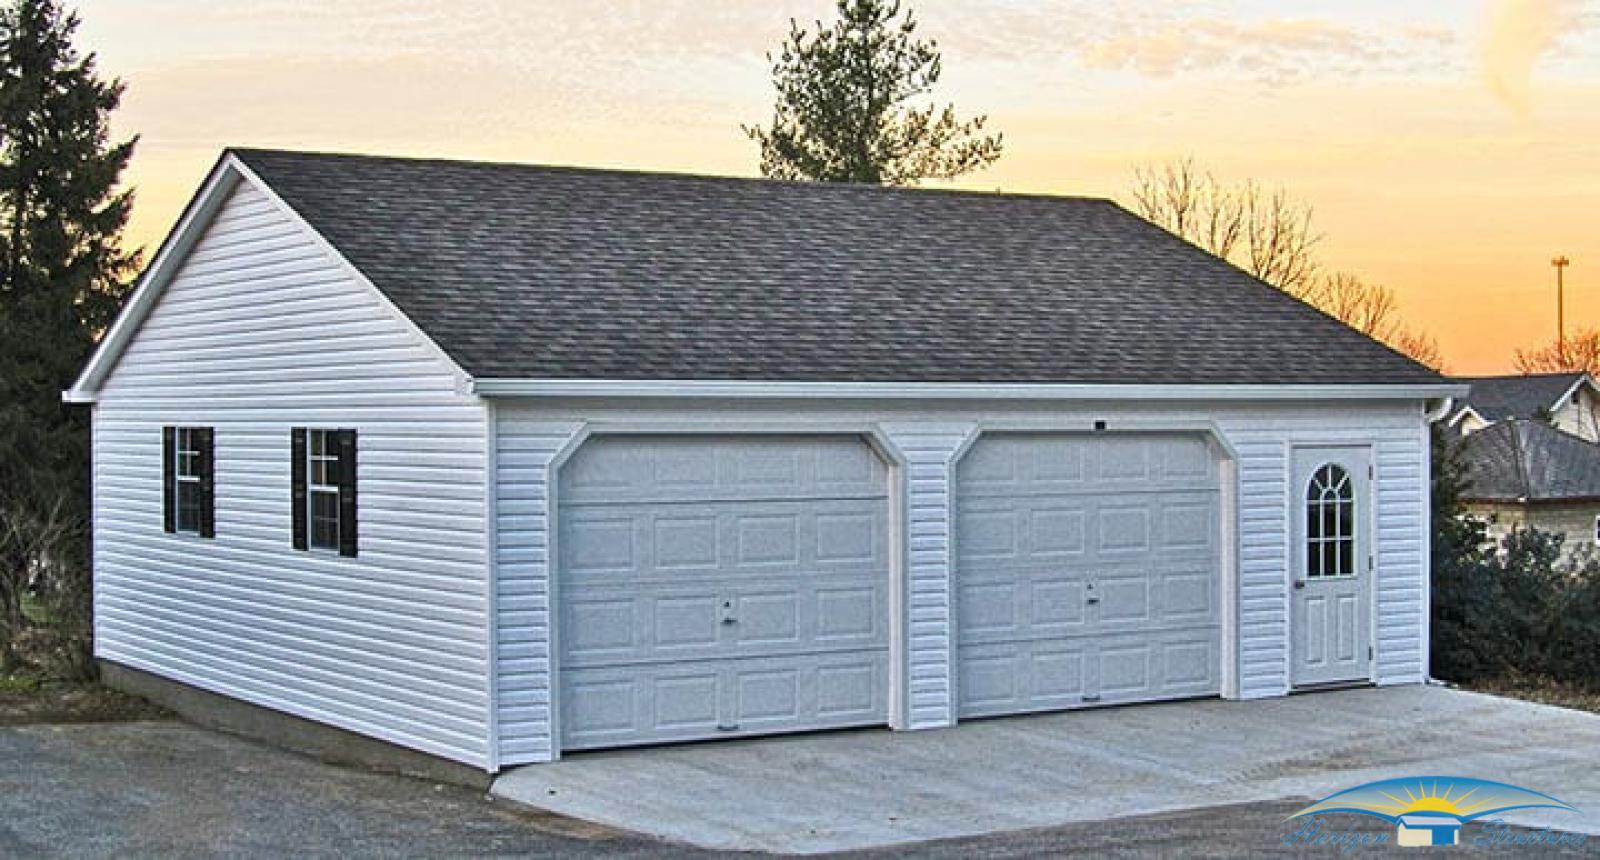 What is the Perfect Size For a 2 Car Garage? - Apartment Lovers